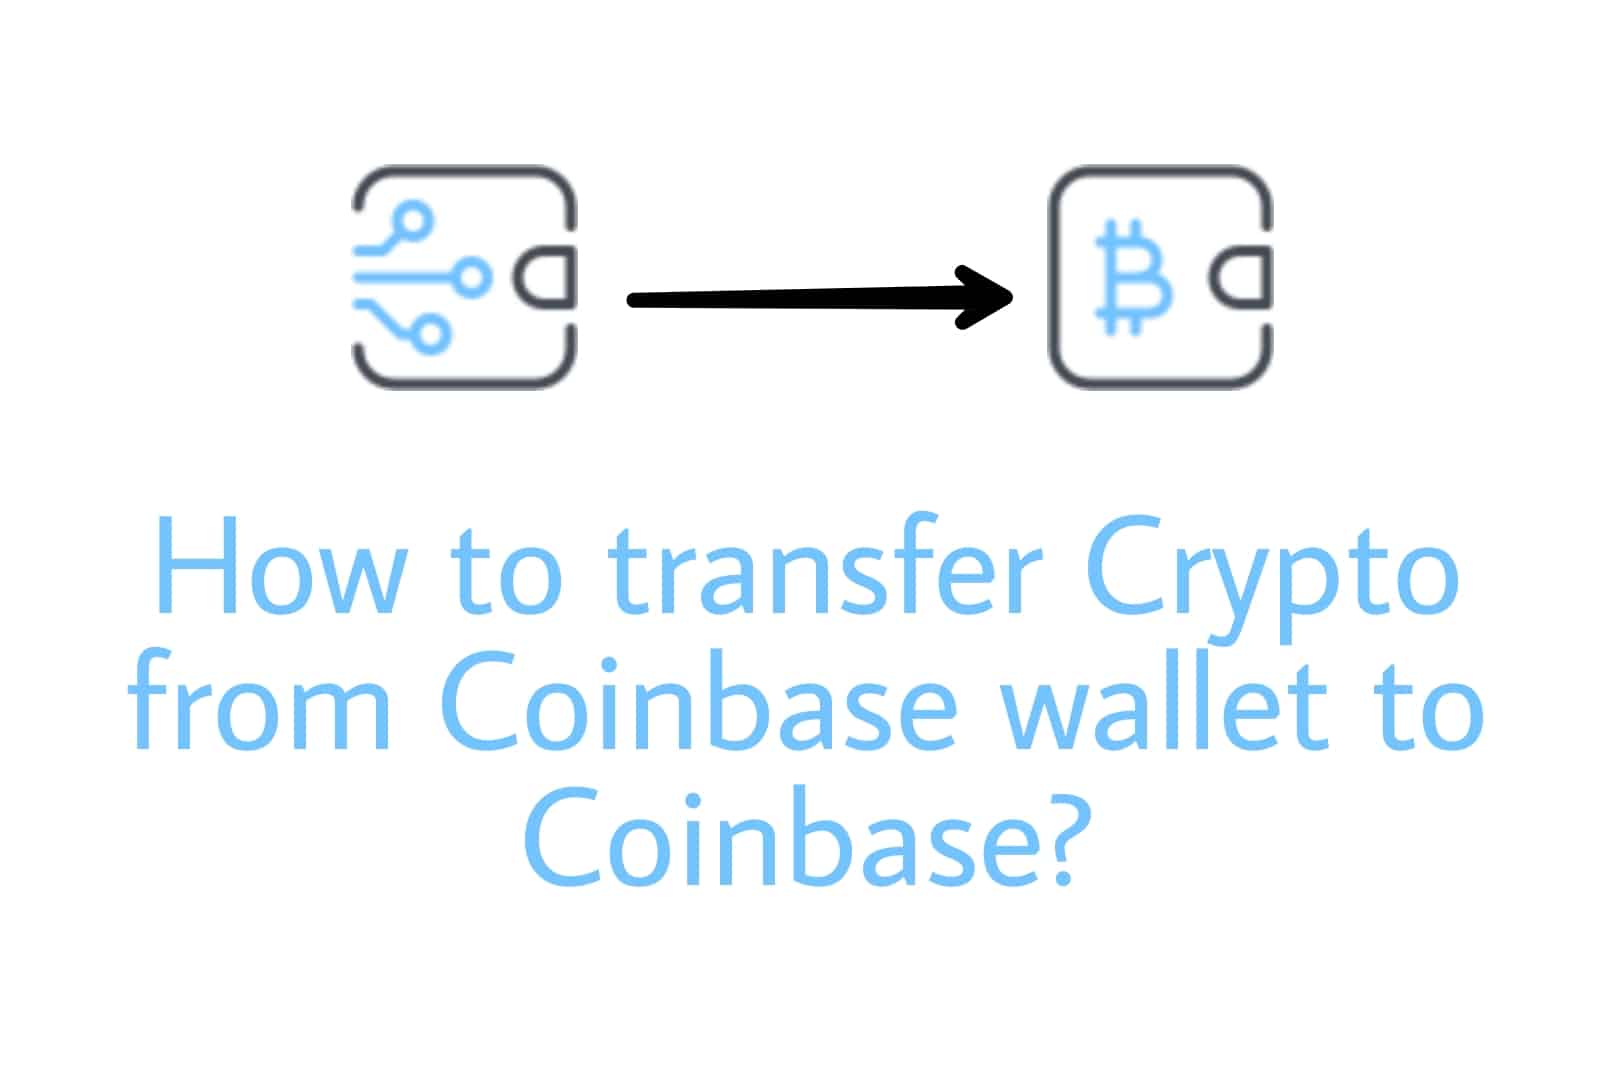 How to transfer Crypto from Coinbase wallet to Coinbase